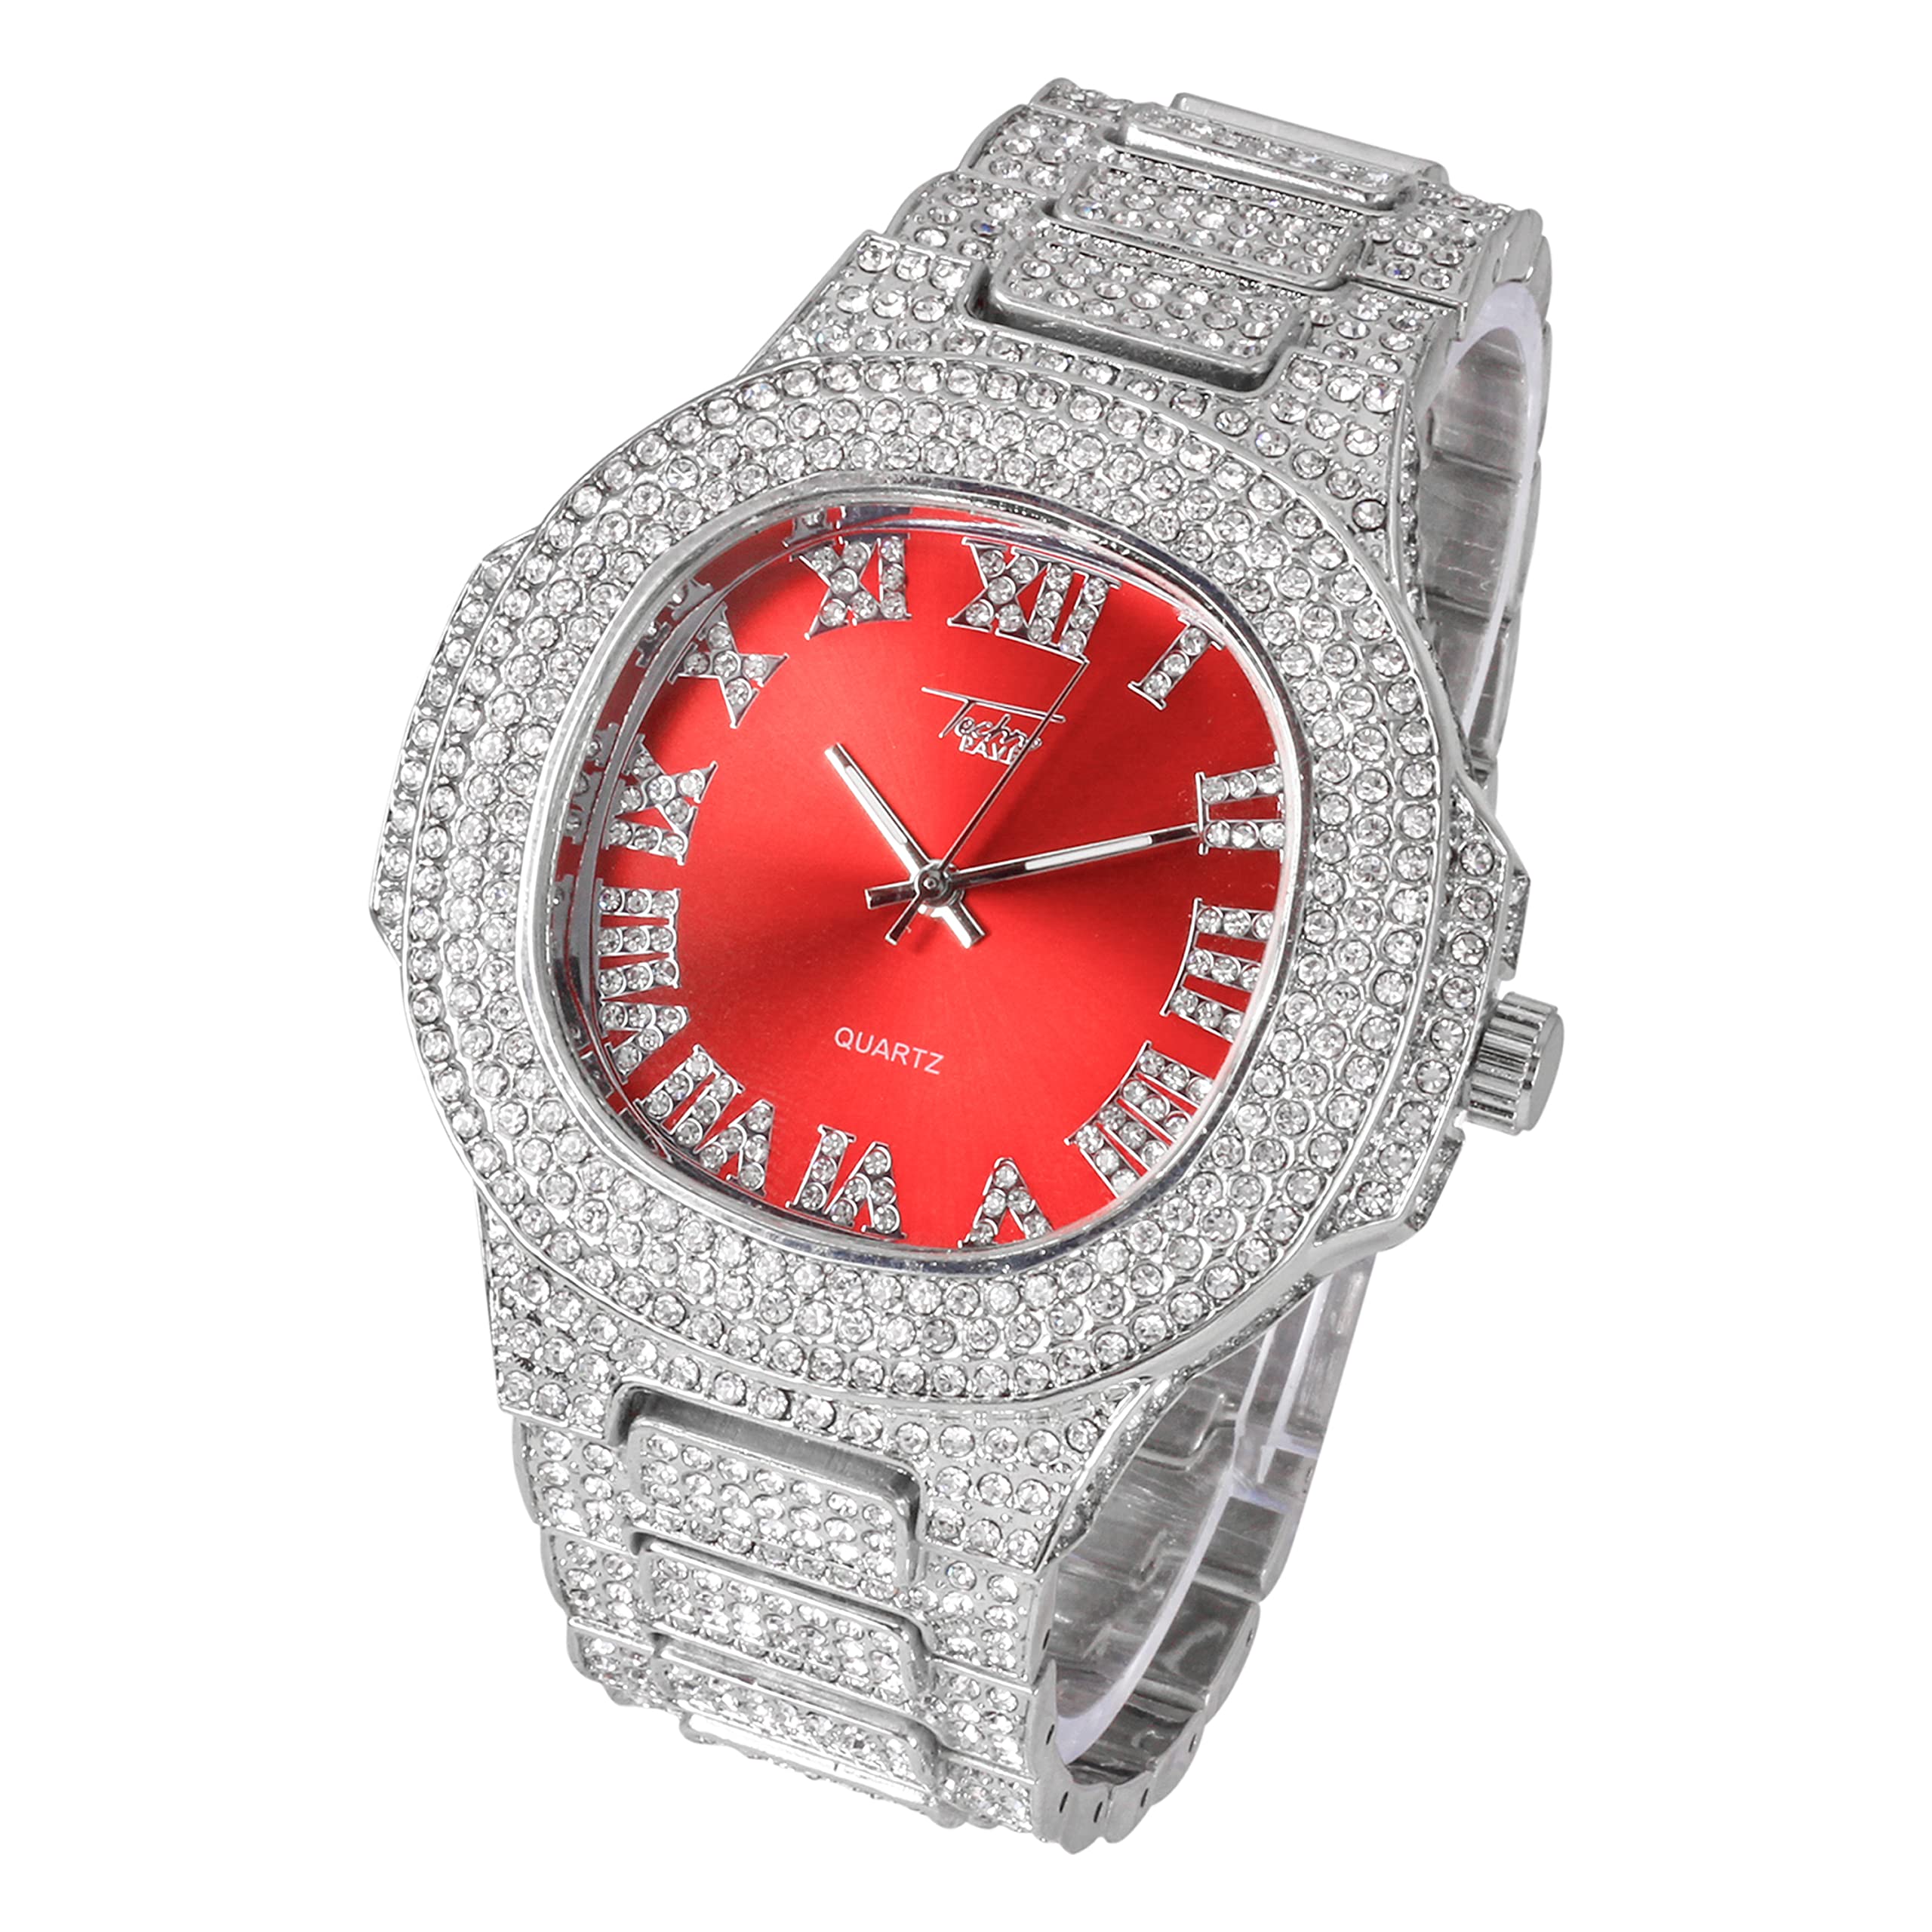 Men's Square Iced Out Watch 50mm Silver - Roman Dial